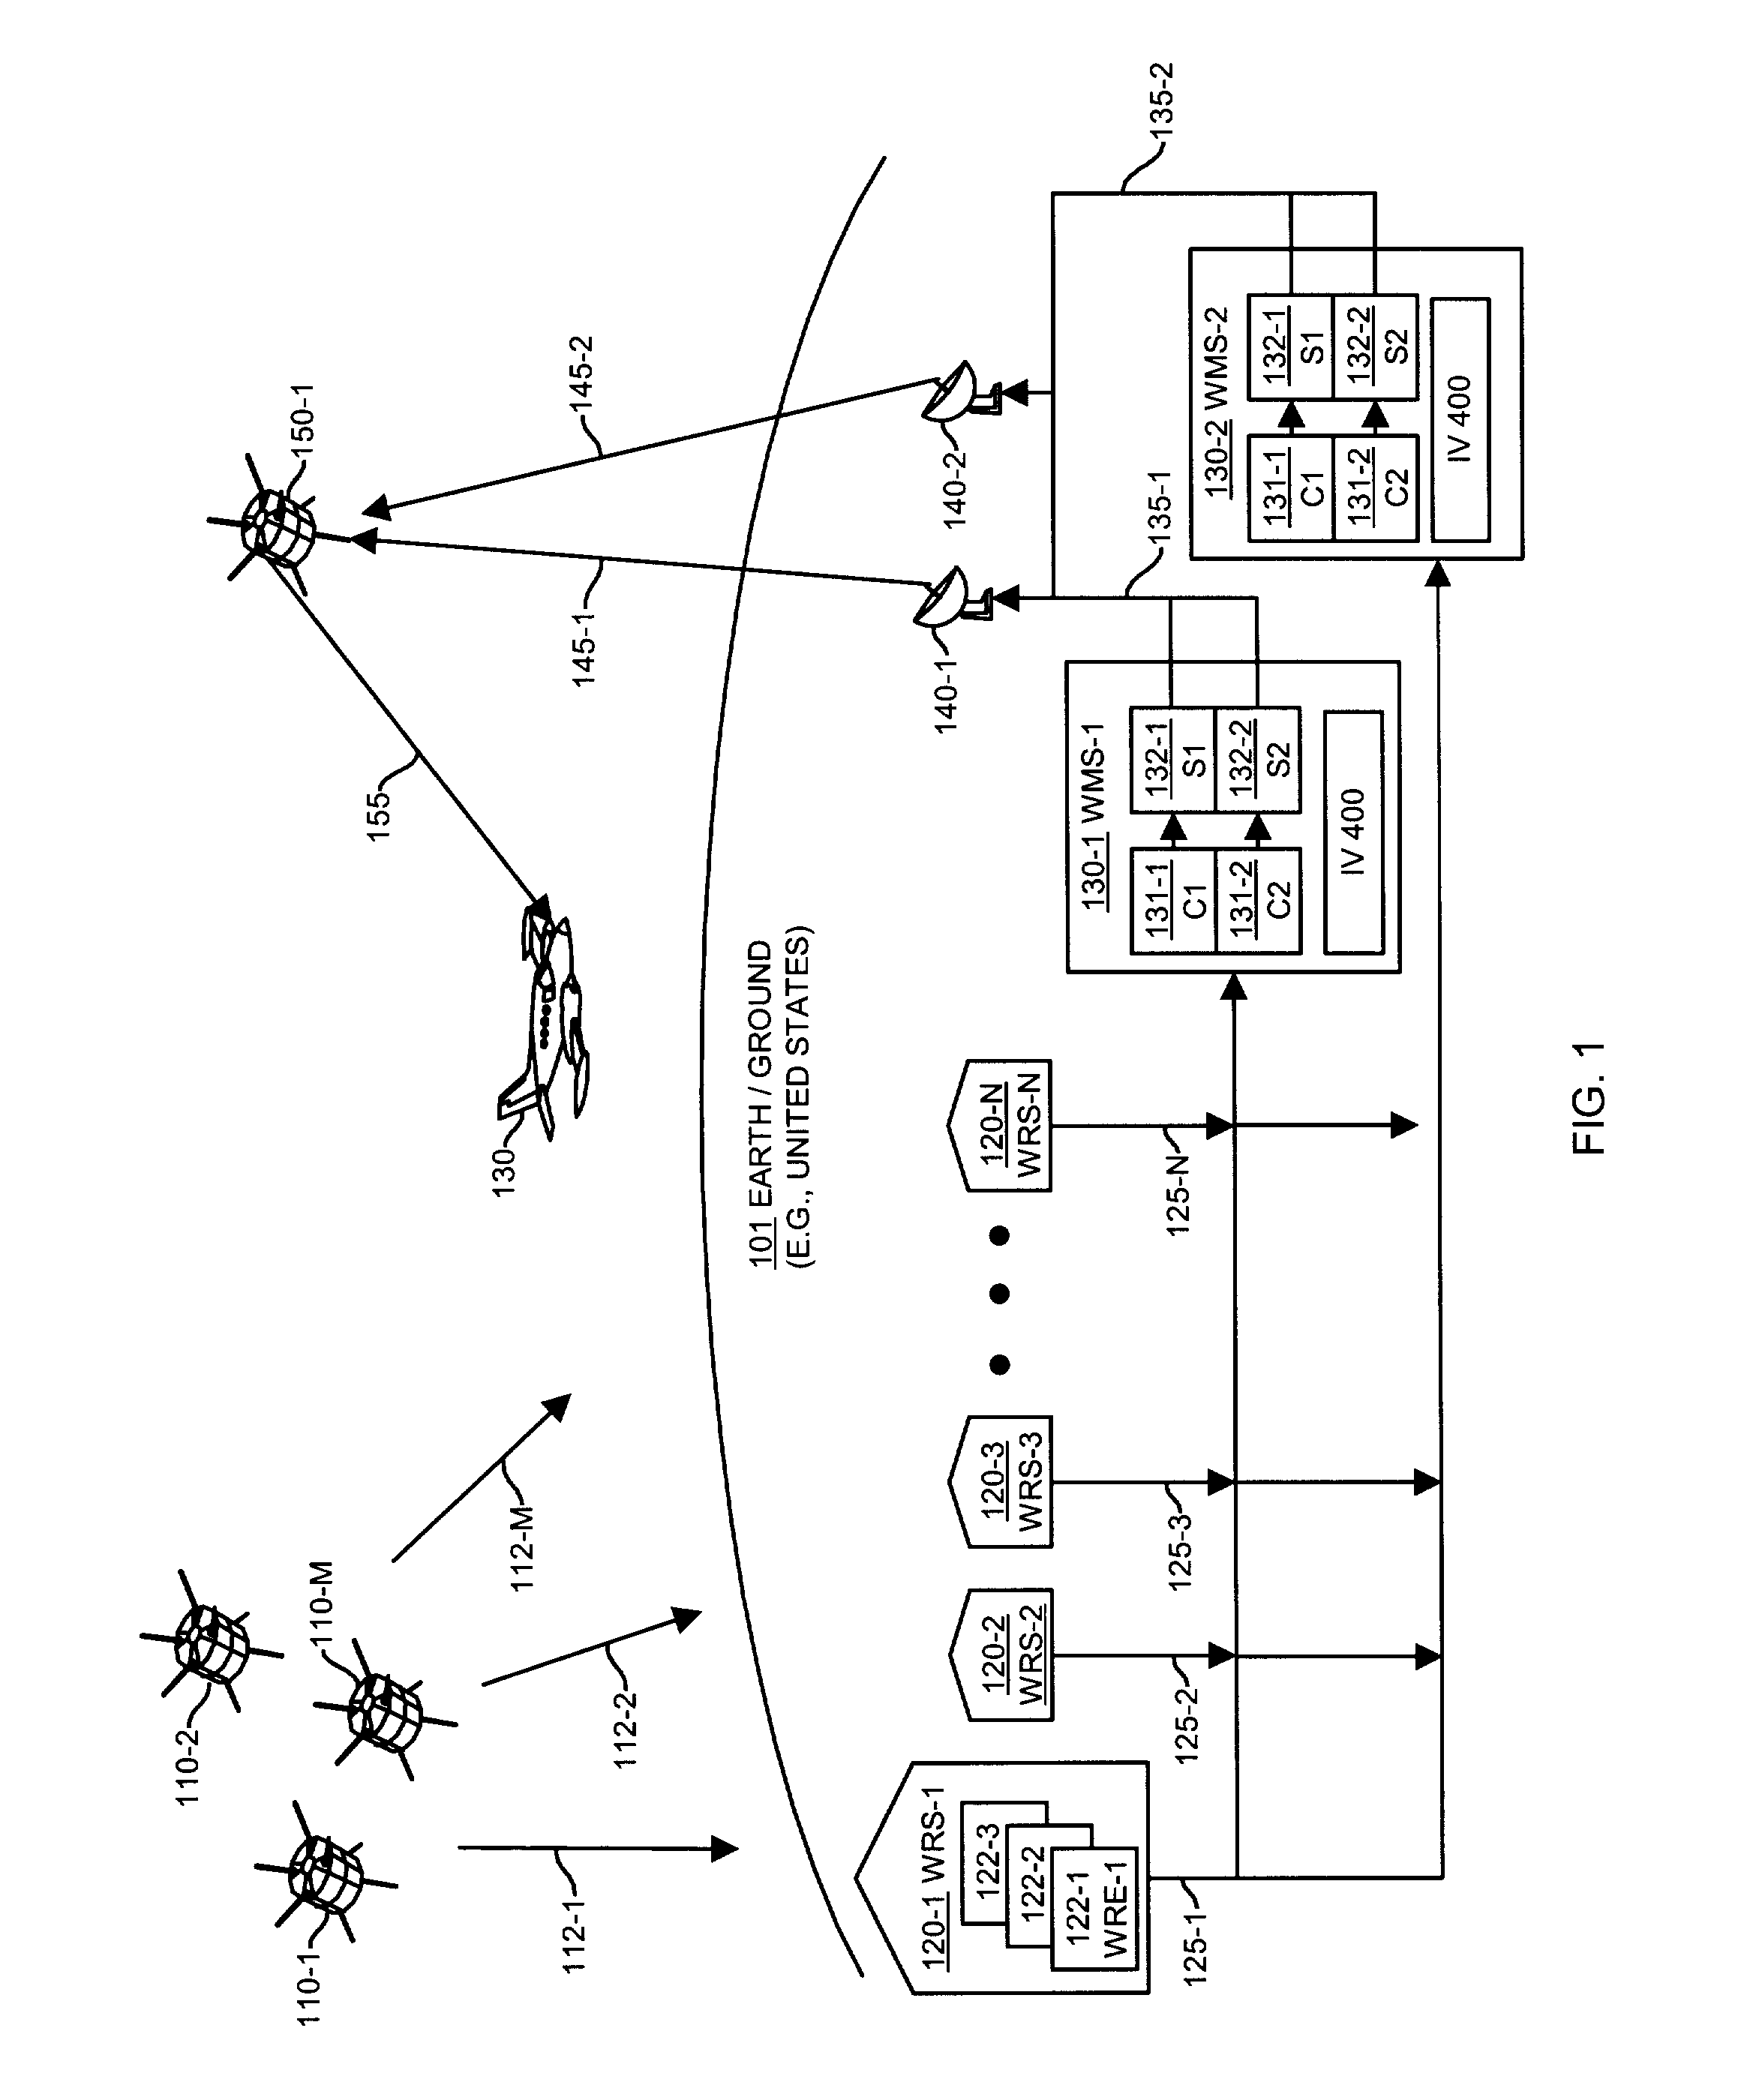 Methods and apparatus for evaluating operational integrity of a data processing system using moment bounding